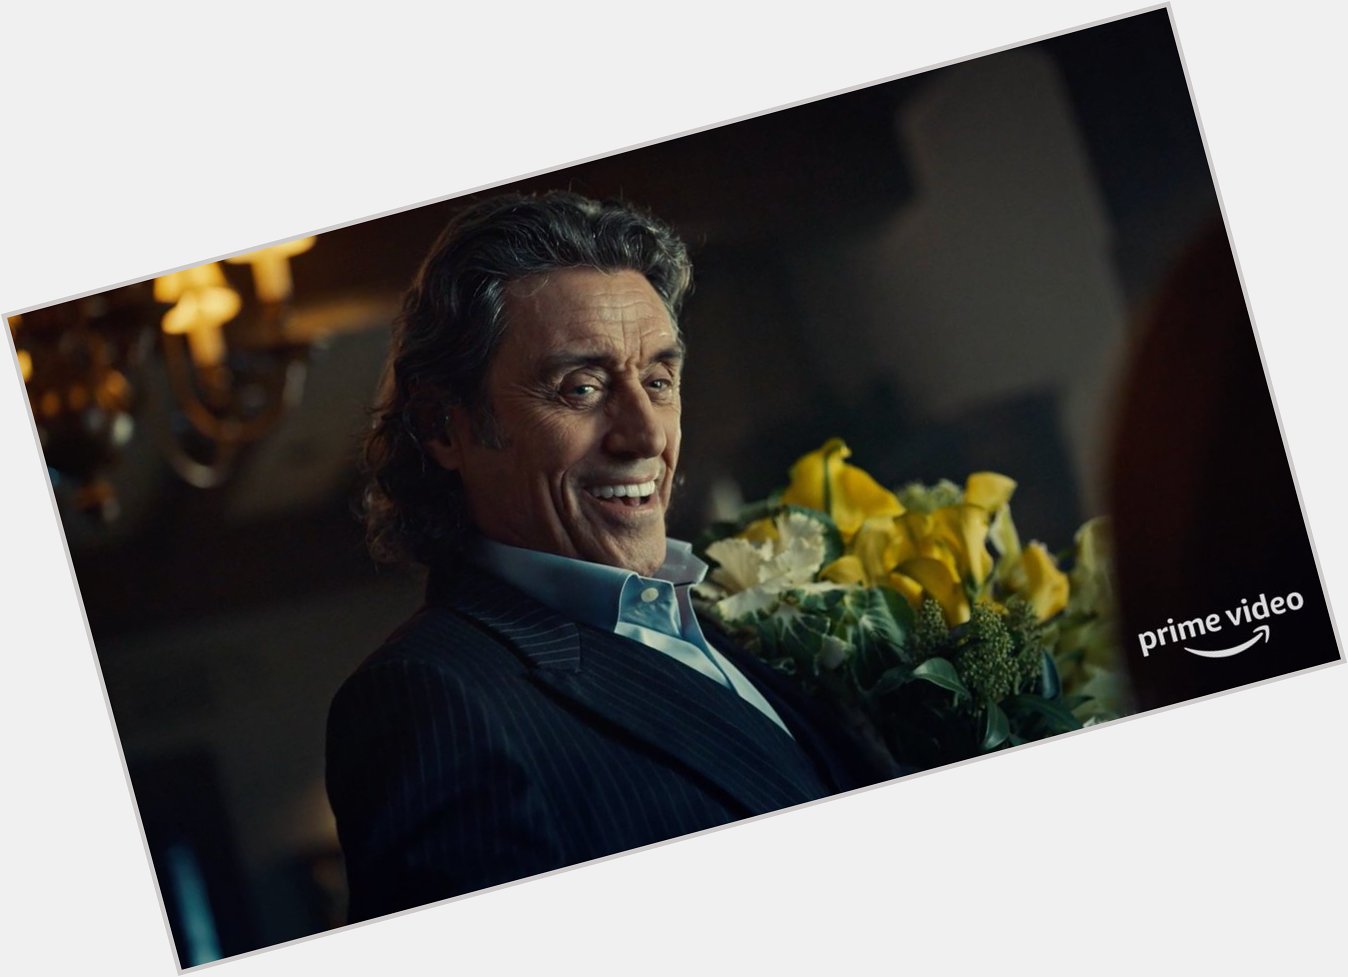 Wishing our all-father, the legendary Ian McShane, a very happy birthday!   